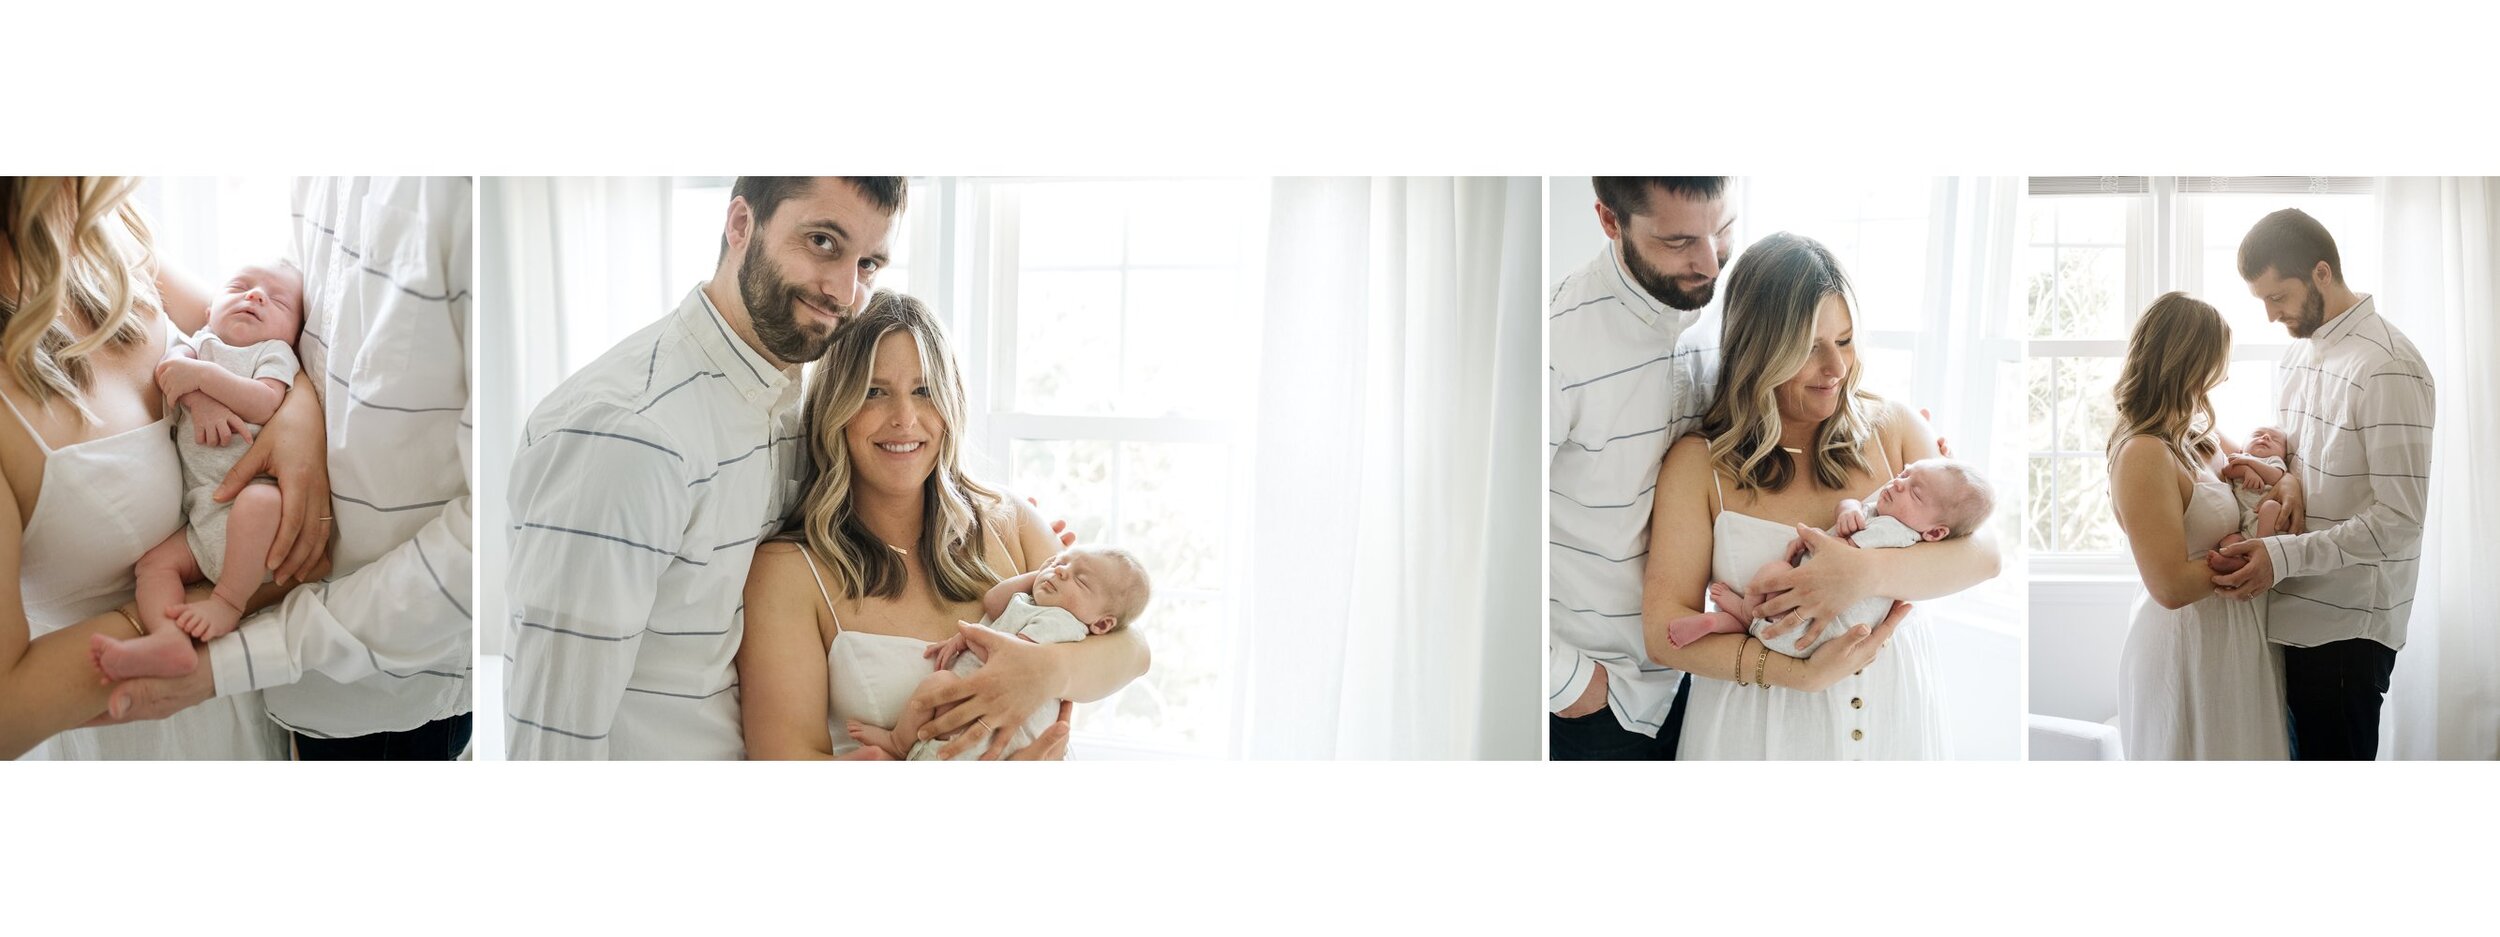 lifestyle_newborn_portraits_of_young_parents_holding_baby_girl_by_window_in_towson_md_home.jpg